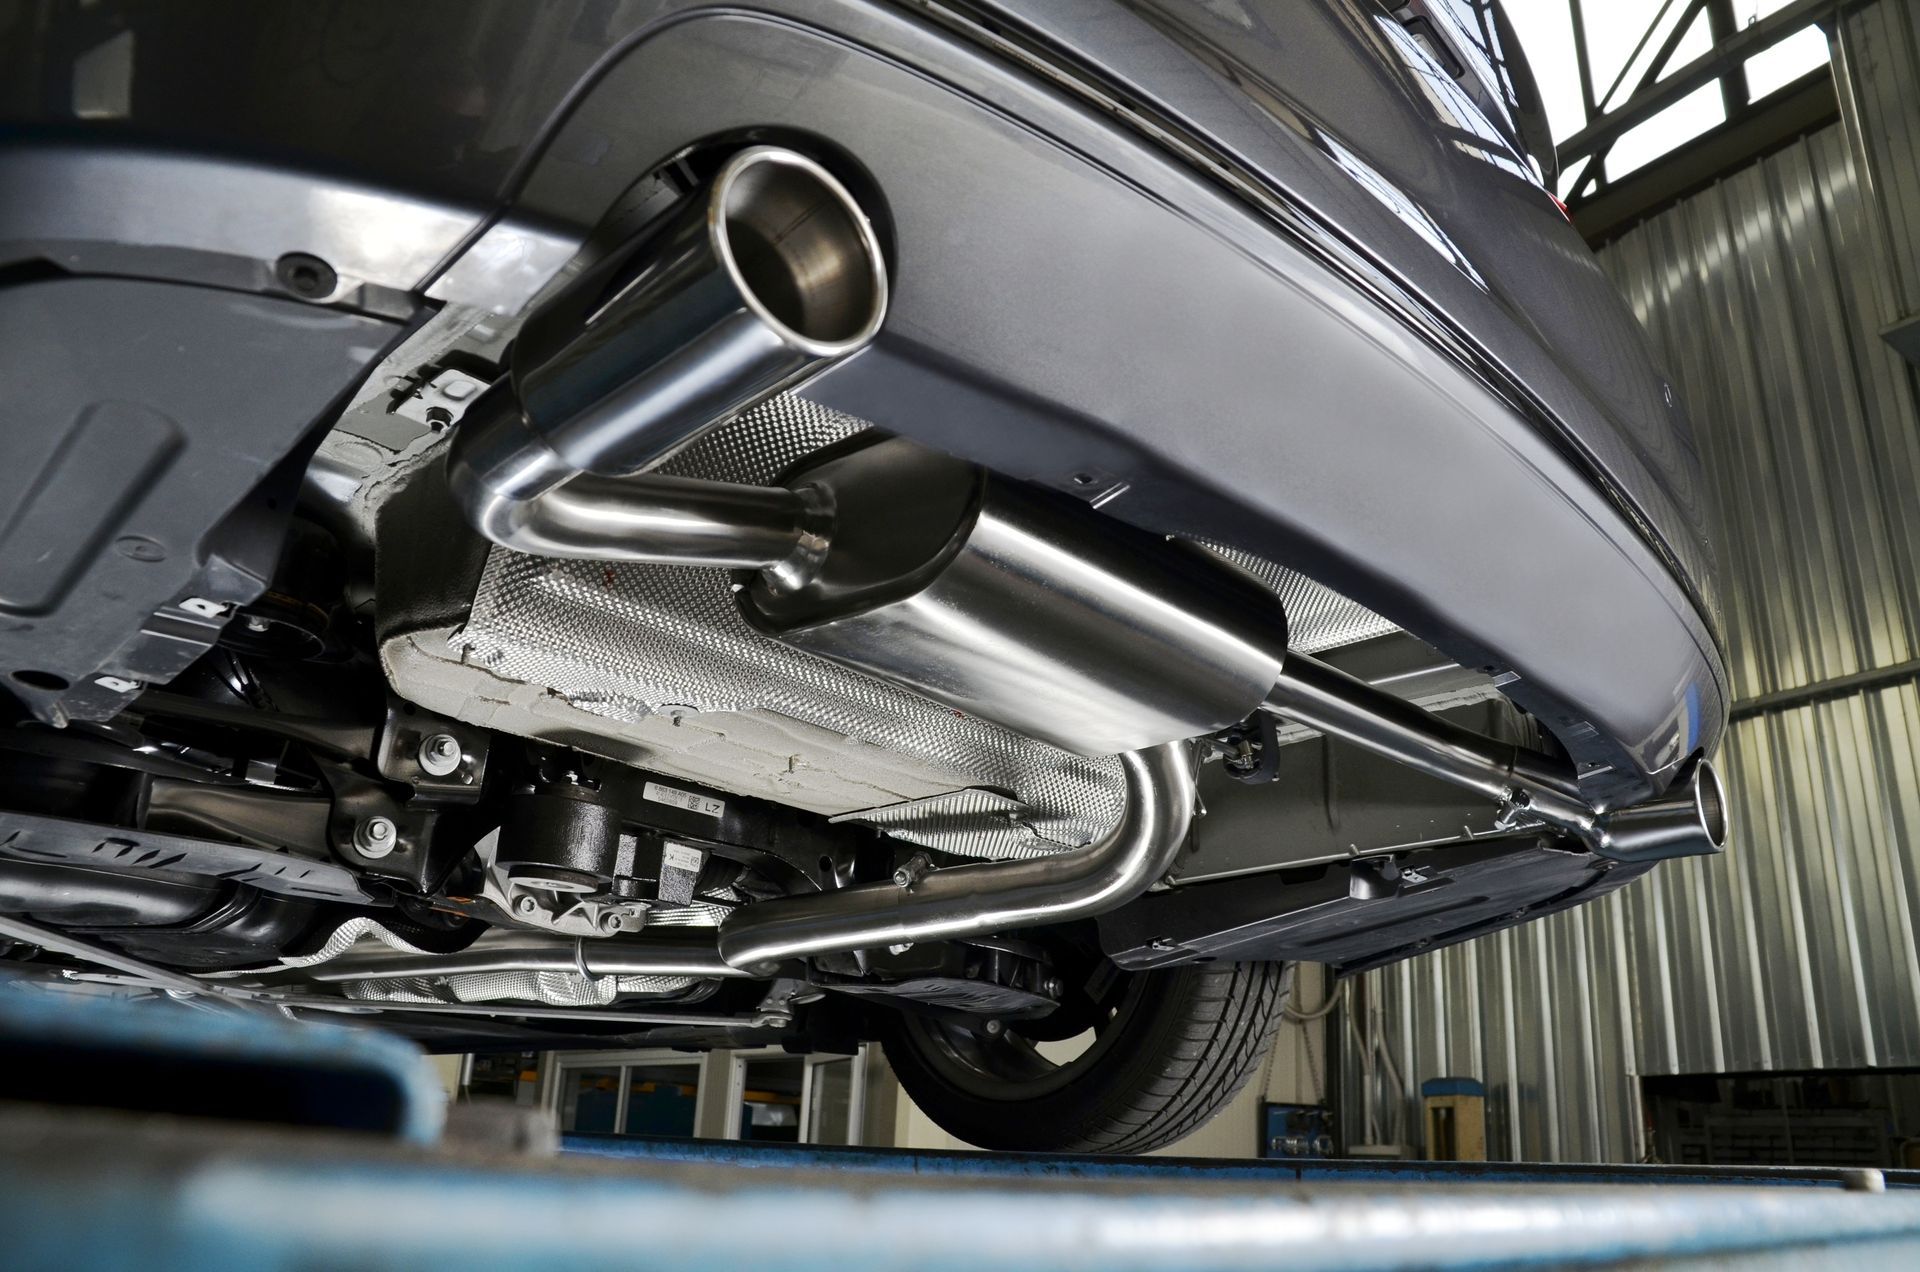 Exhaust Service at ﻿RGV Tire Pros/Valvoline Express Care﻿ in ﻿Mission and Palmdale, TX﻿